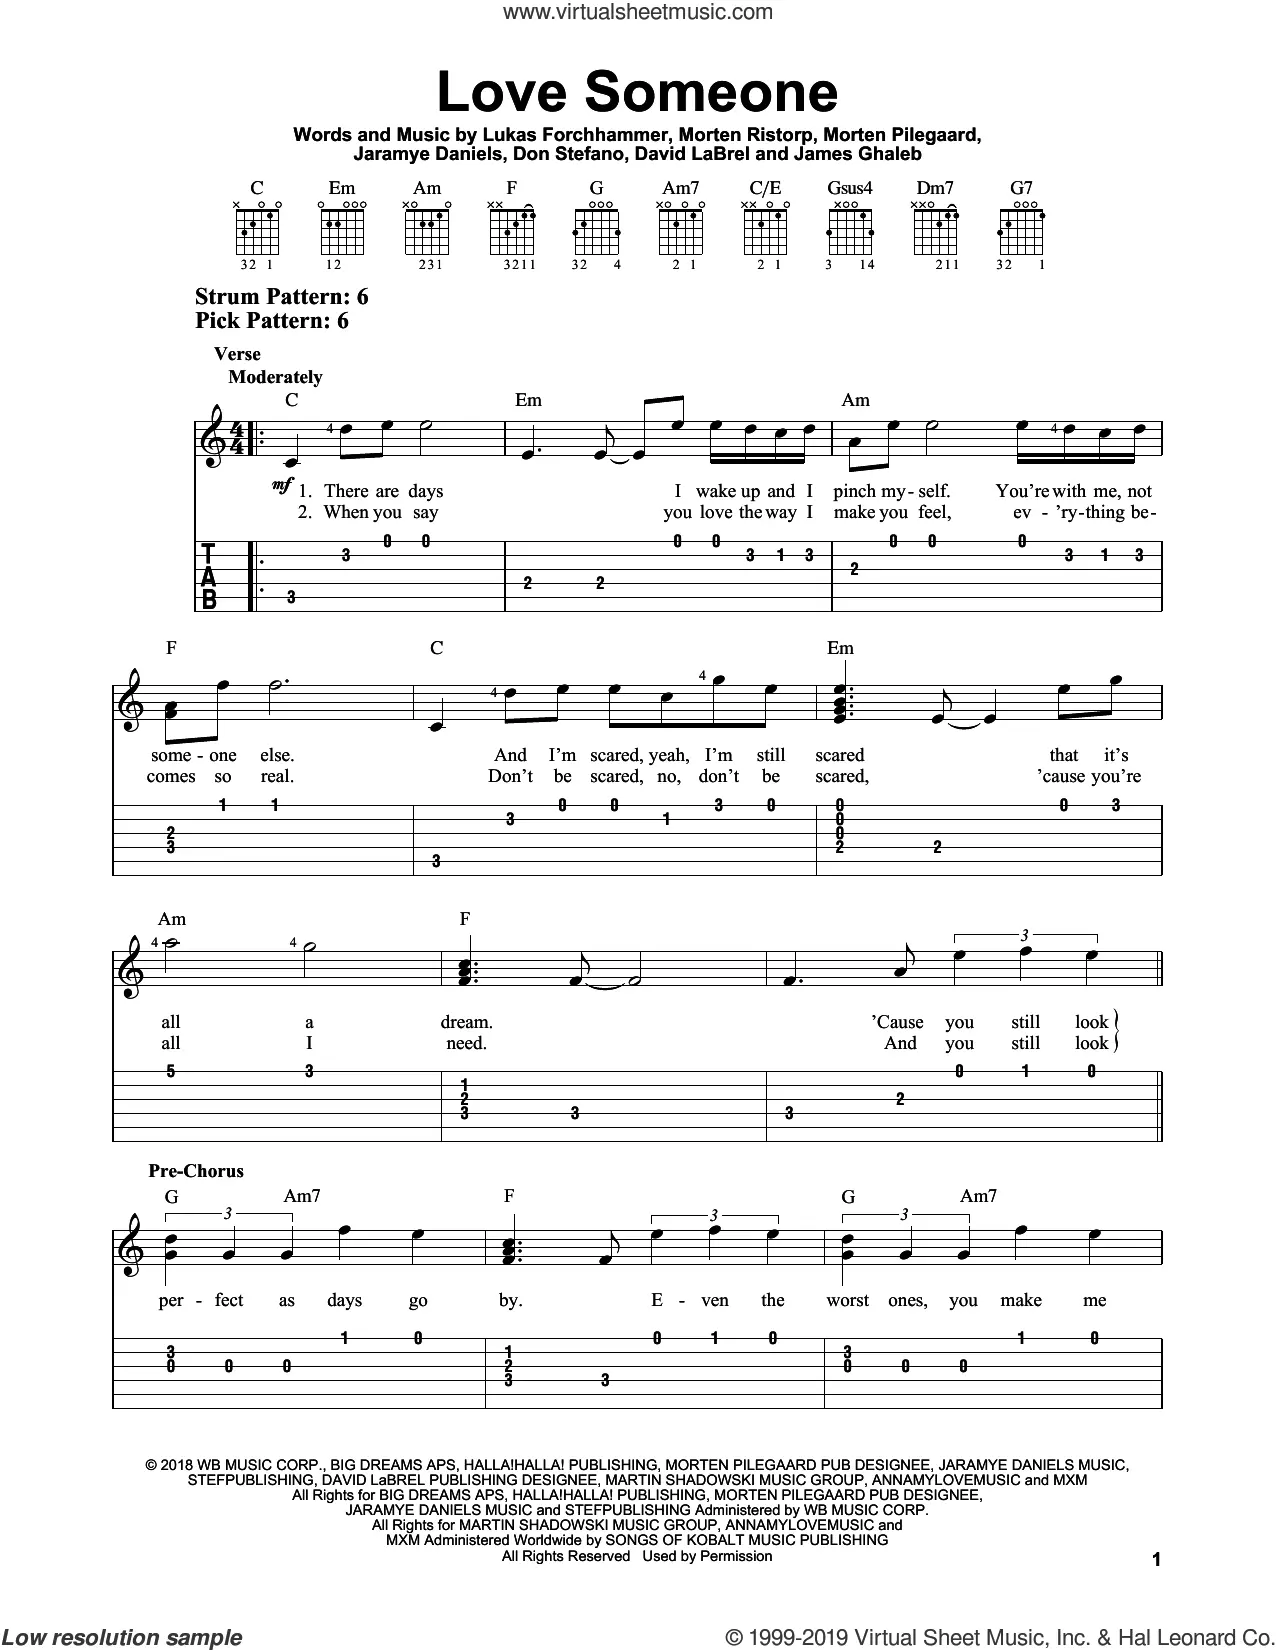 Anoi Humilde Destello Lukas-Graham Sheet Music to download and print